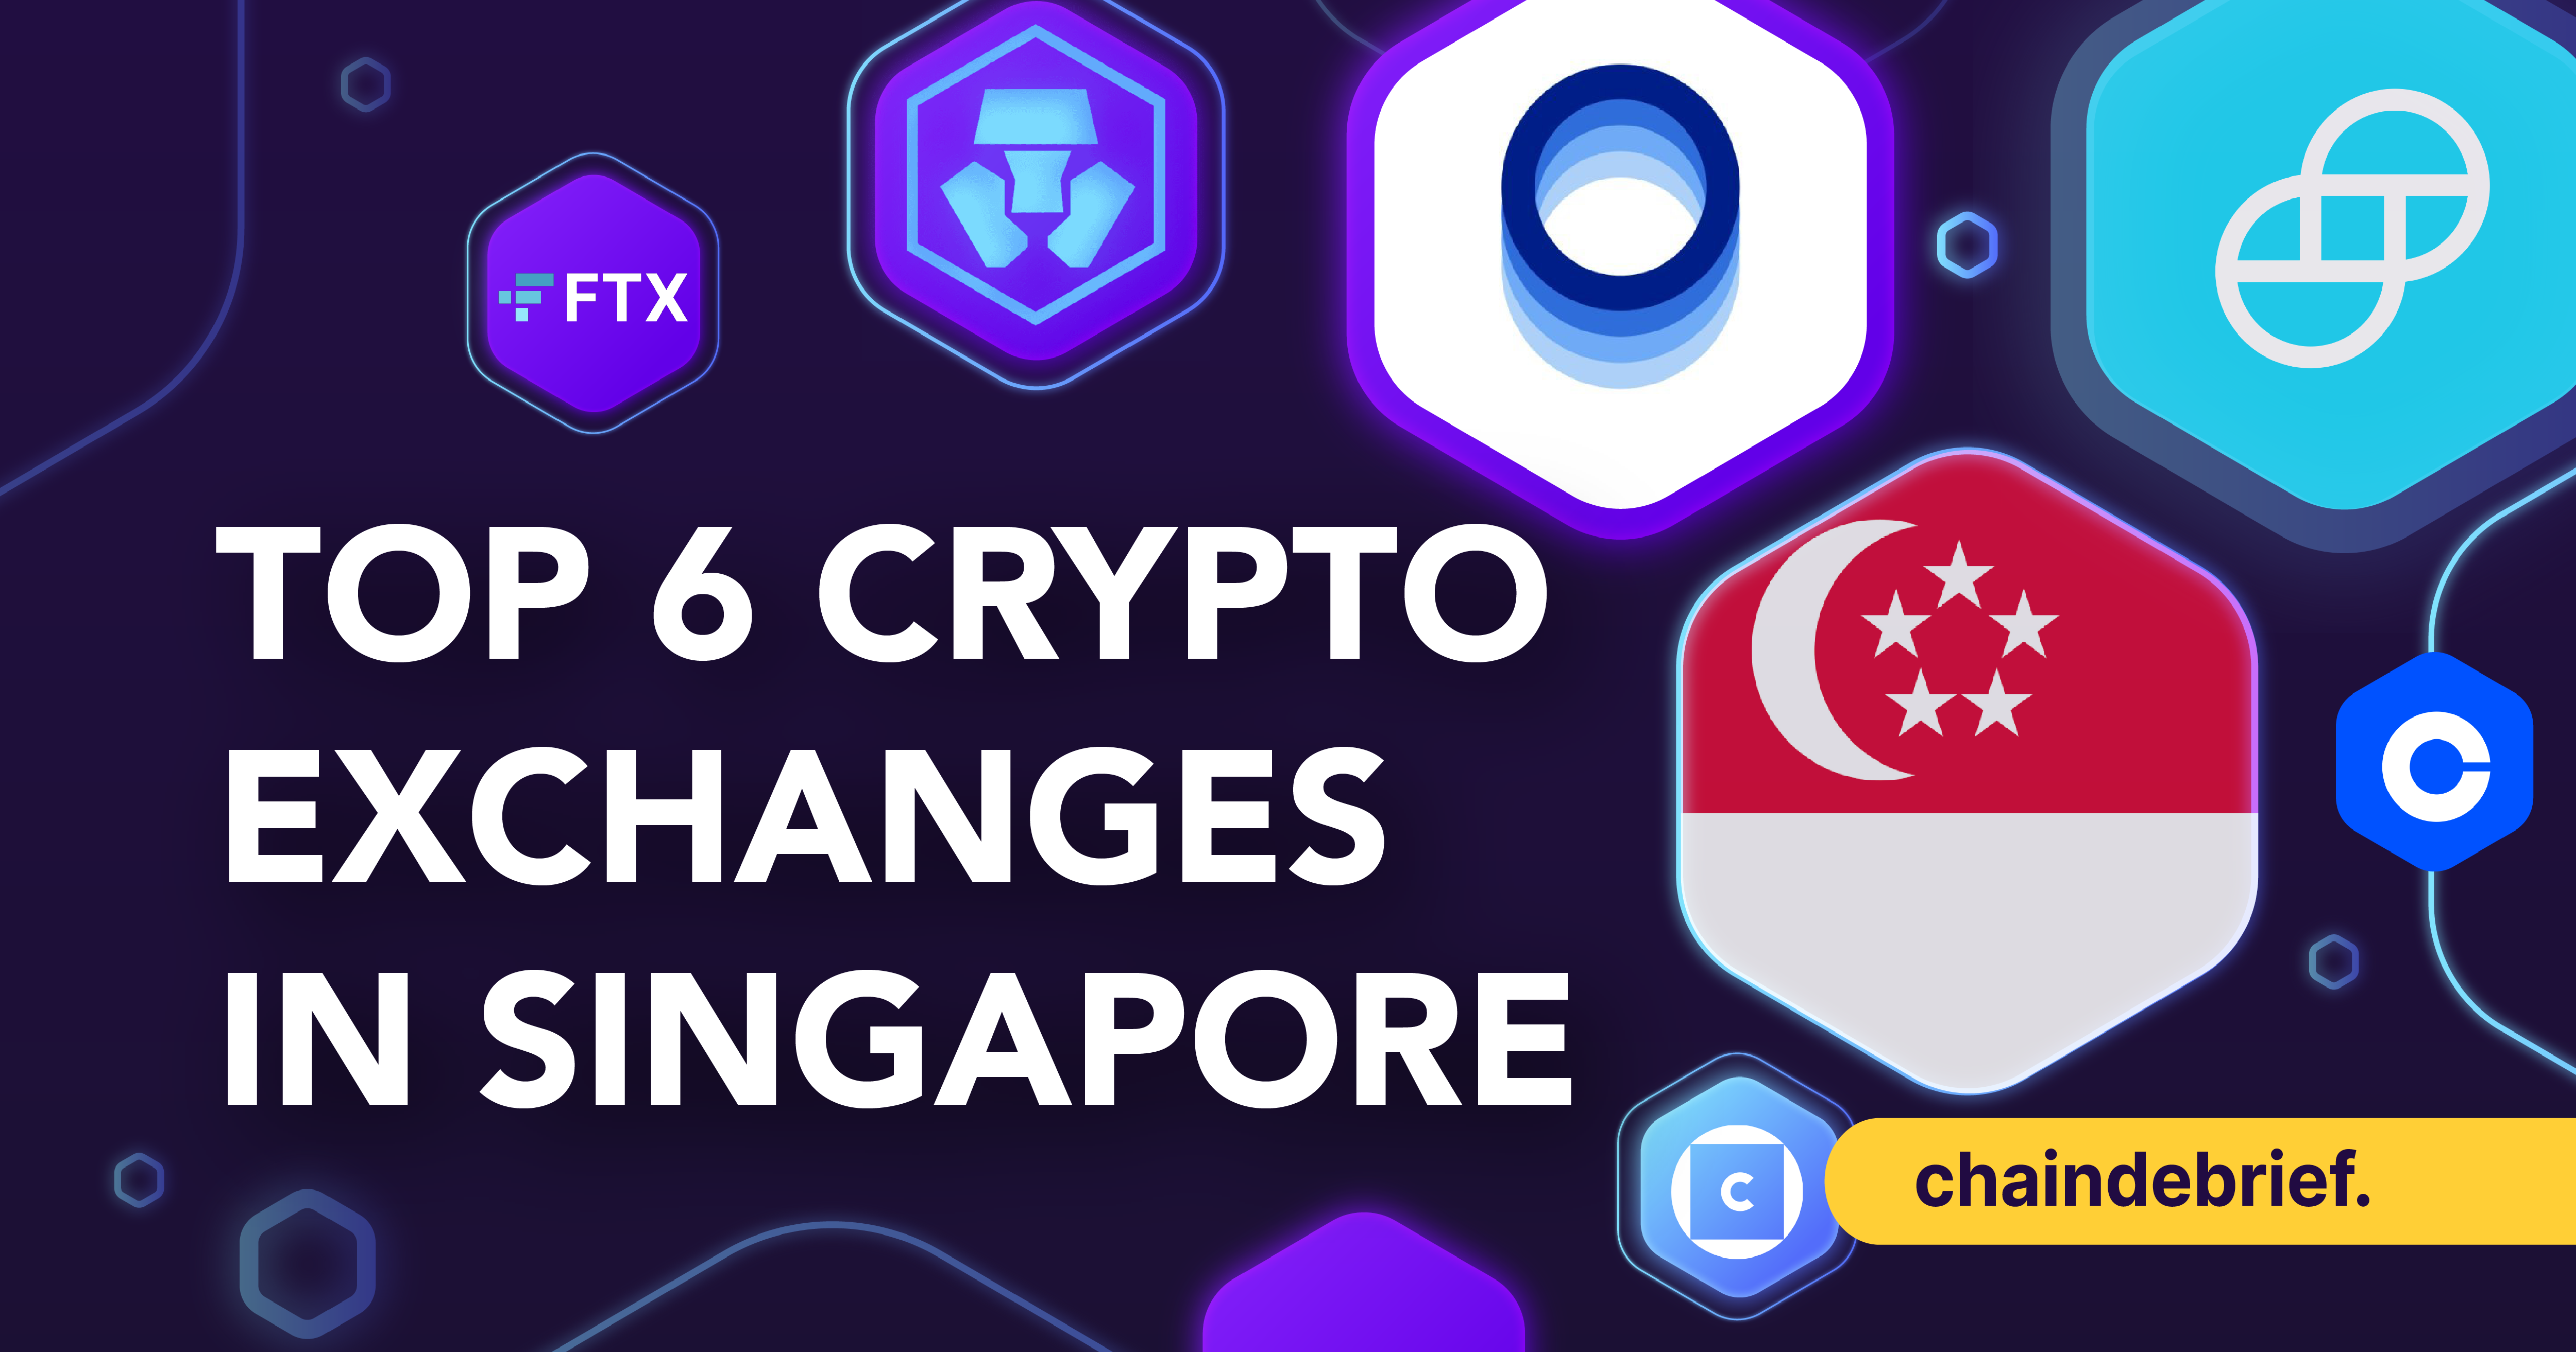 Investing In Crypto? Here Are 6 Exchanges To Buy Crypto From In Singapore In 2022